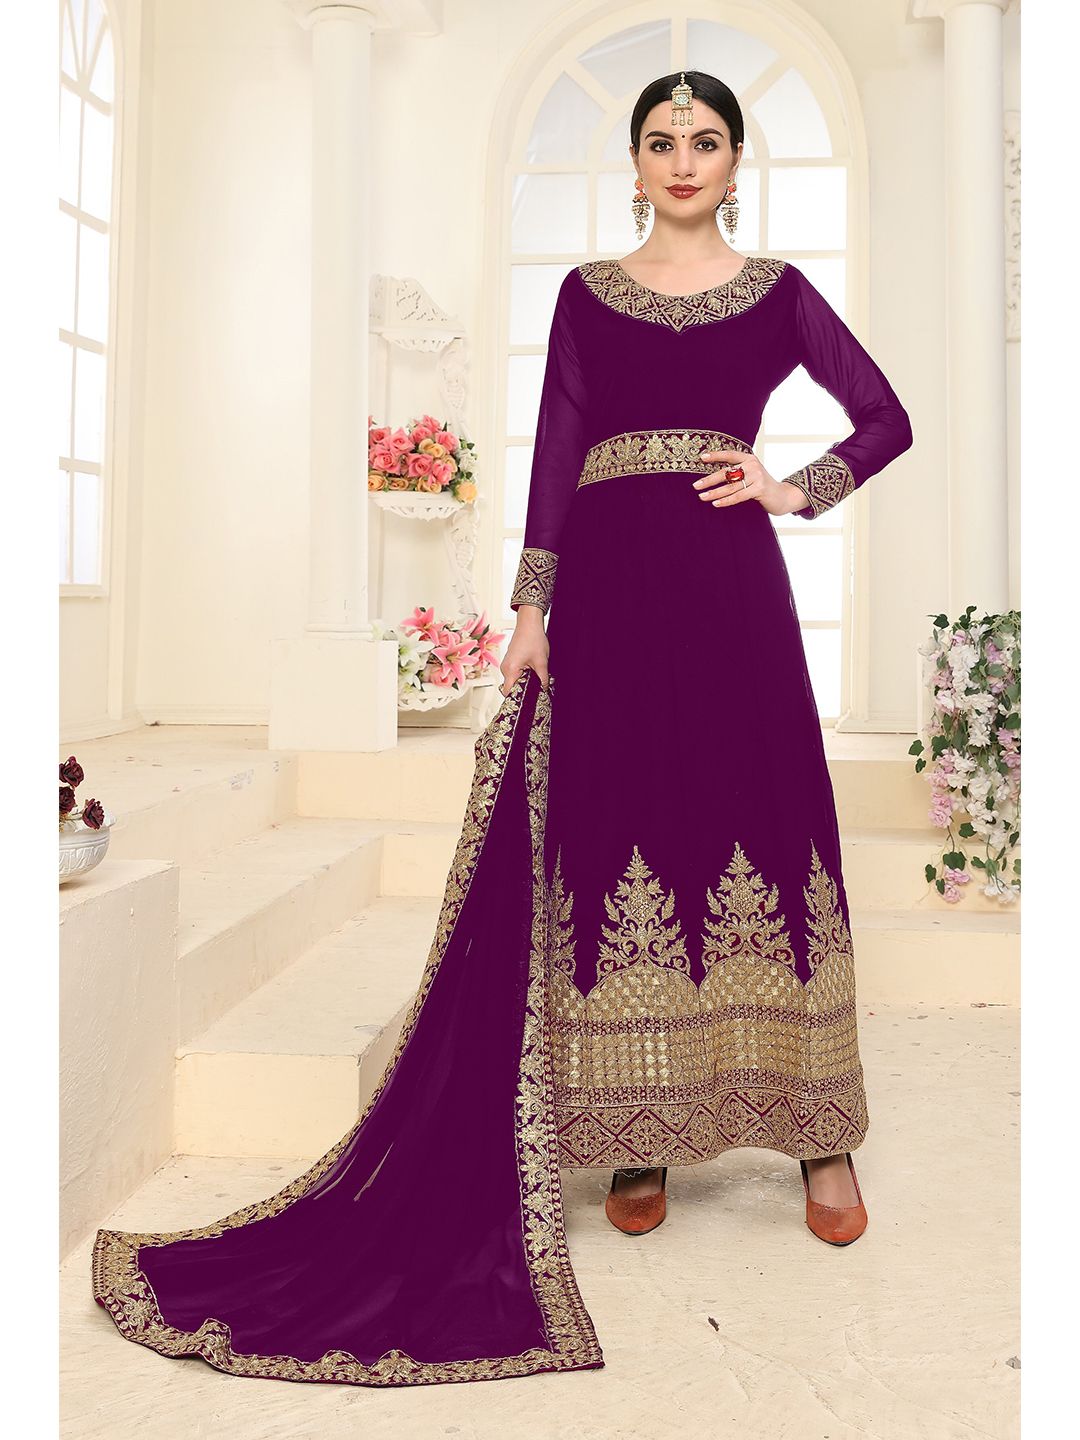 Divine International Trading Co Purple & Gold-Toned Embroidered Unstitched Dress Material Price in India